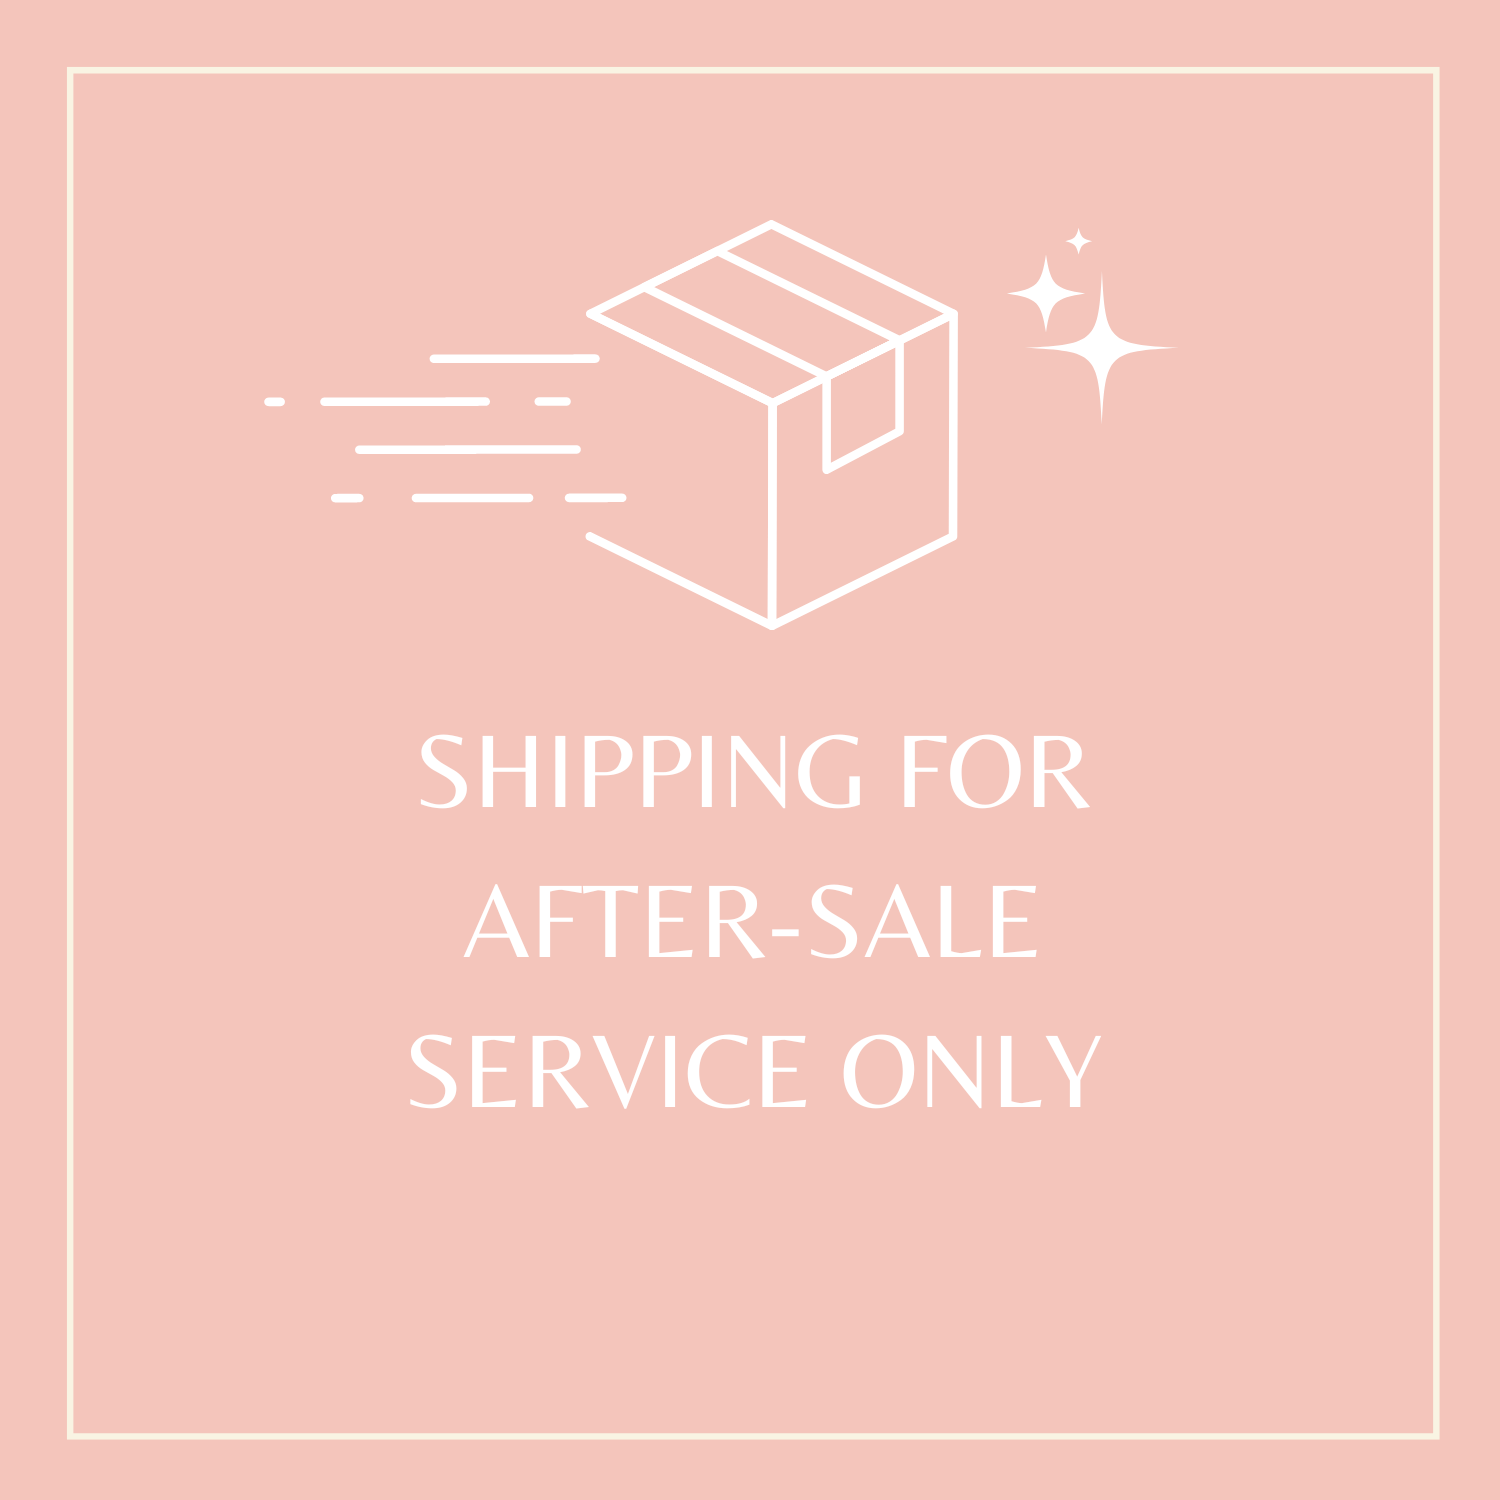 SHIPPING FOR AFTER-SALE SERVICE ONLY 4